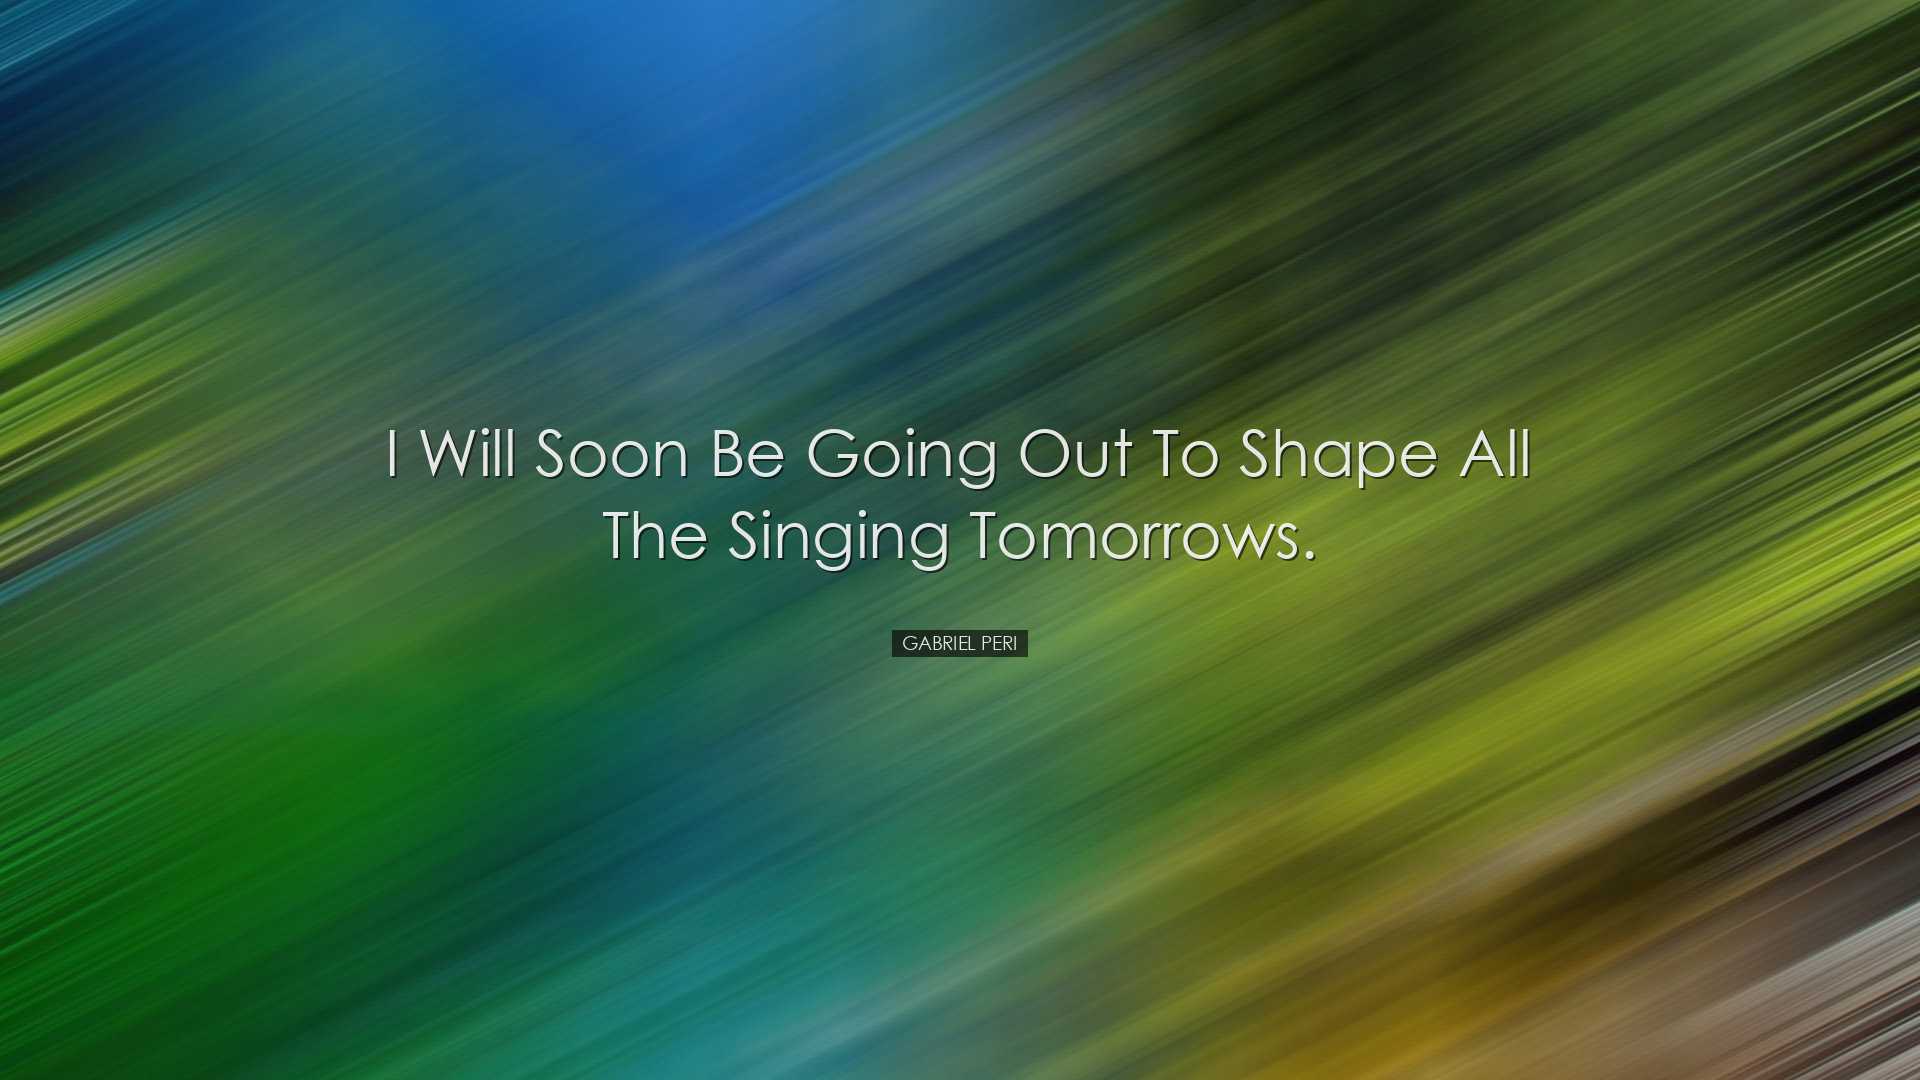 I will soon be going out to shape all the singing tomorrows. - Gab